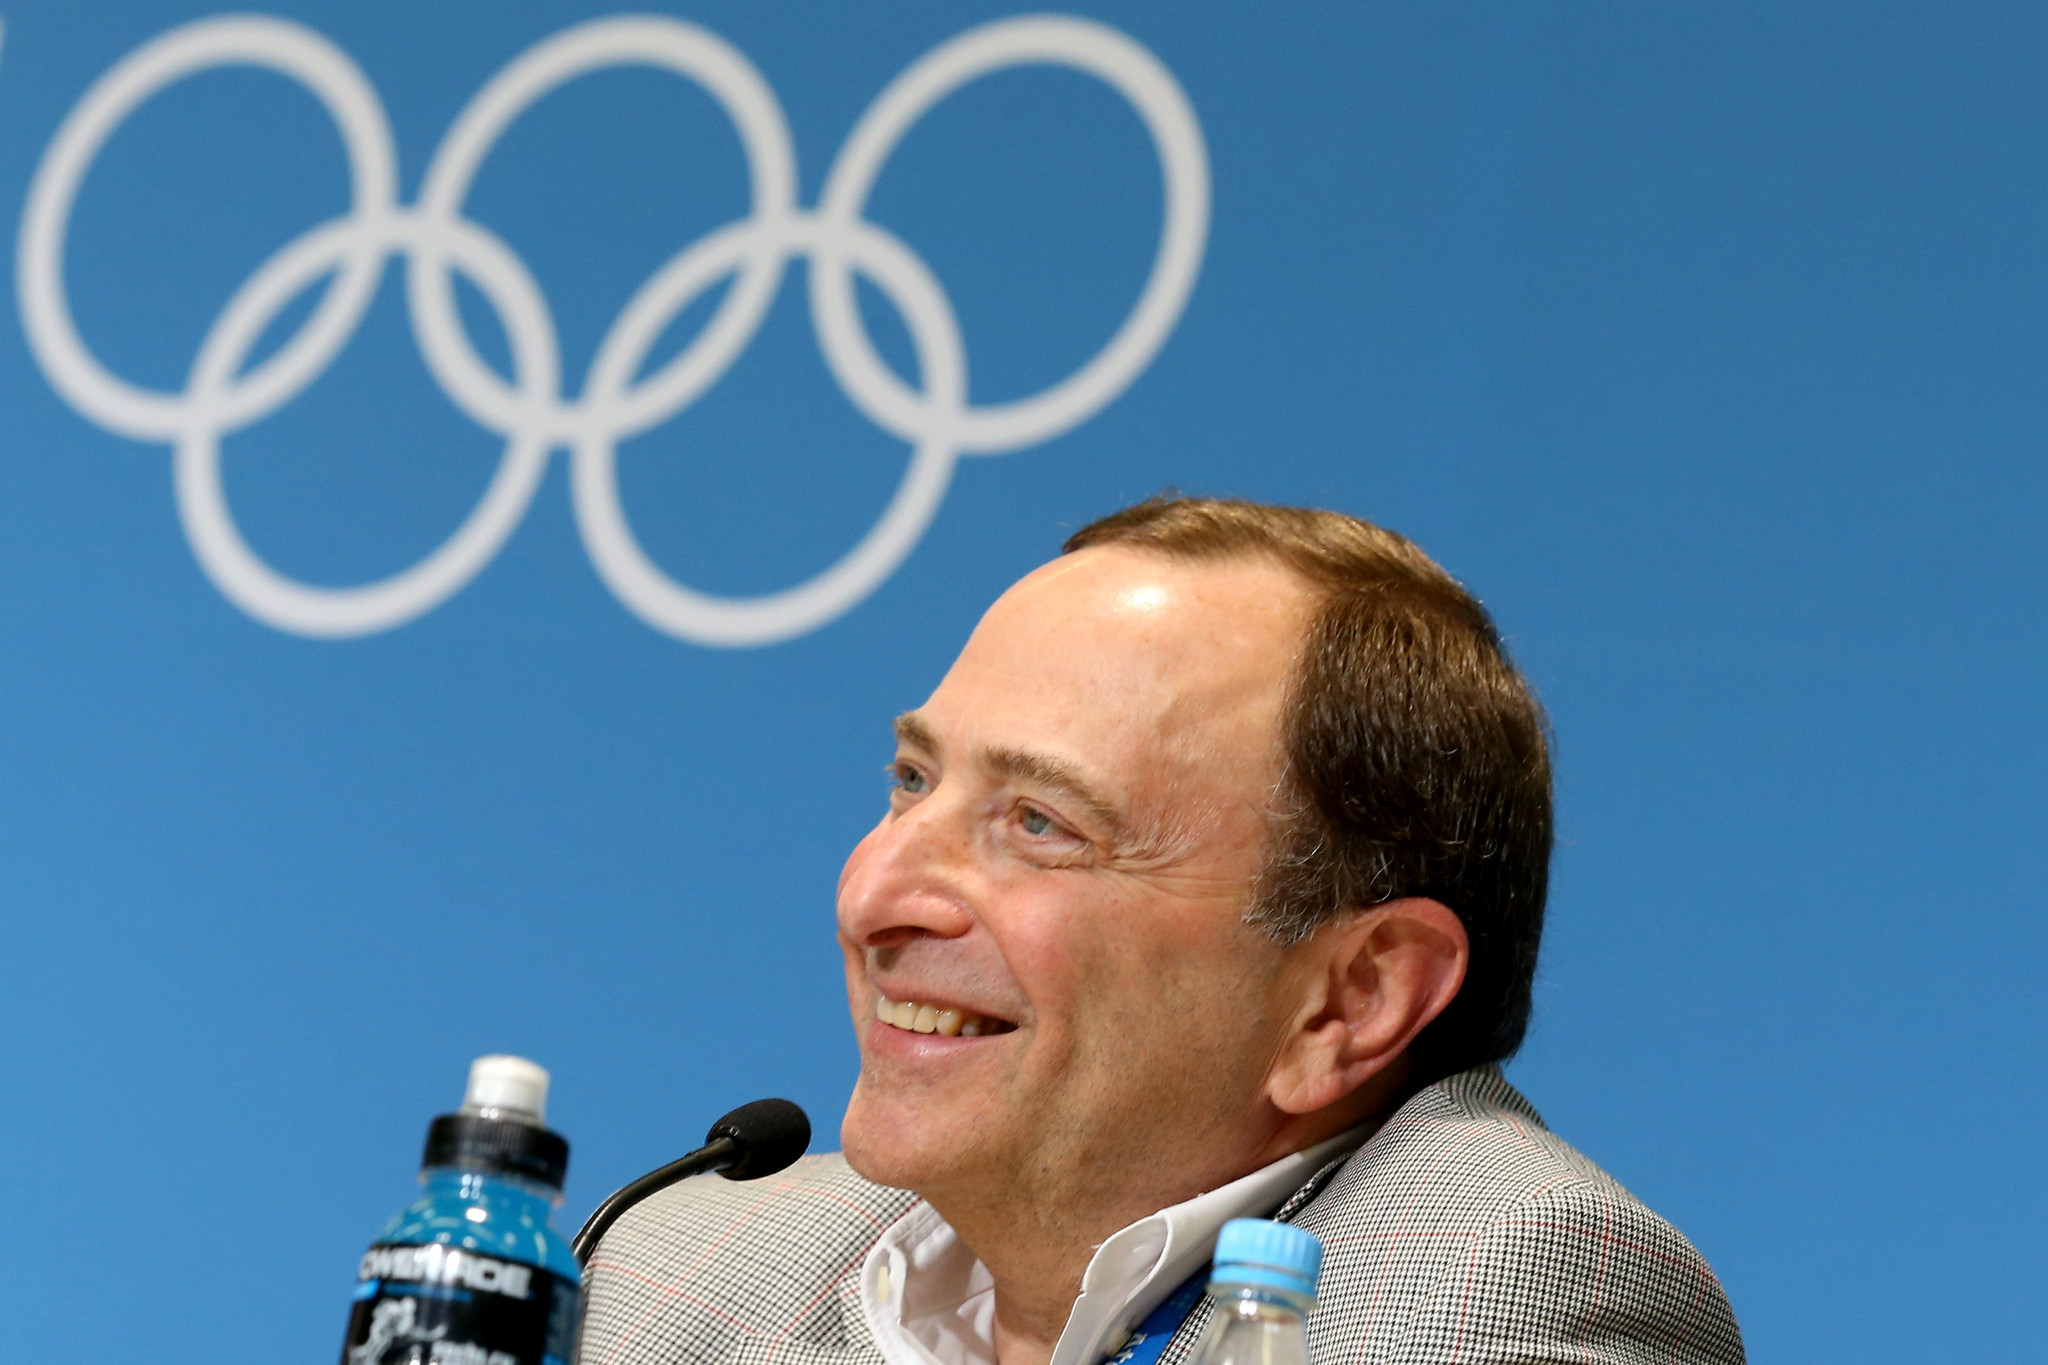 NHL Commissioner Bettman added to Hockey Hall of Fame